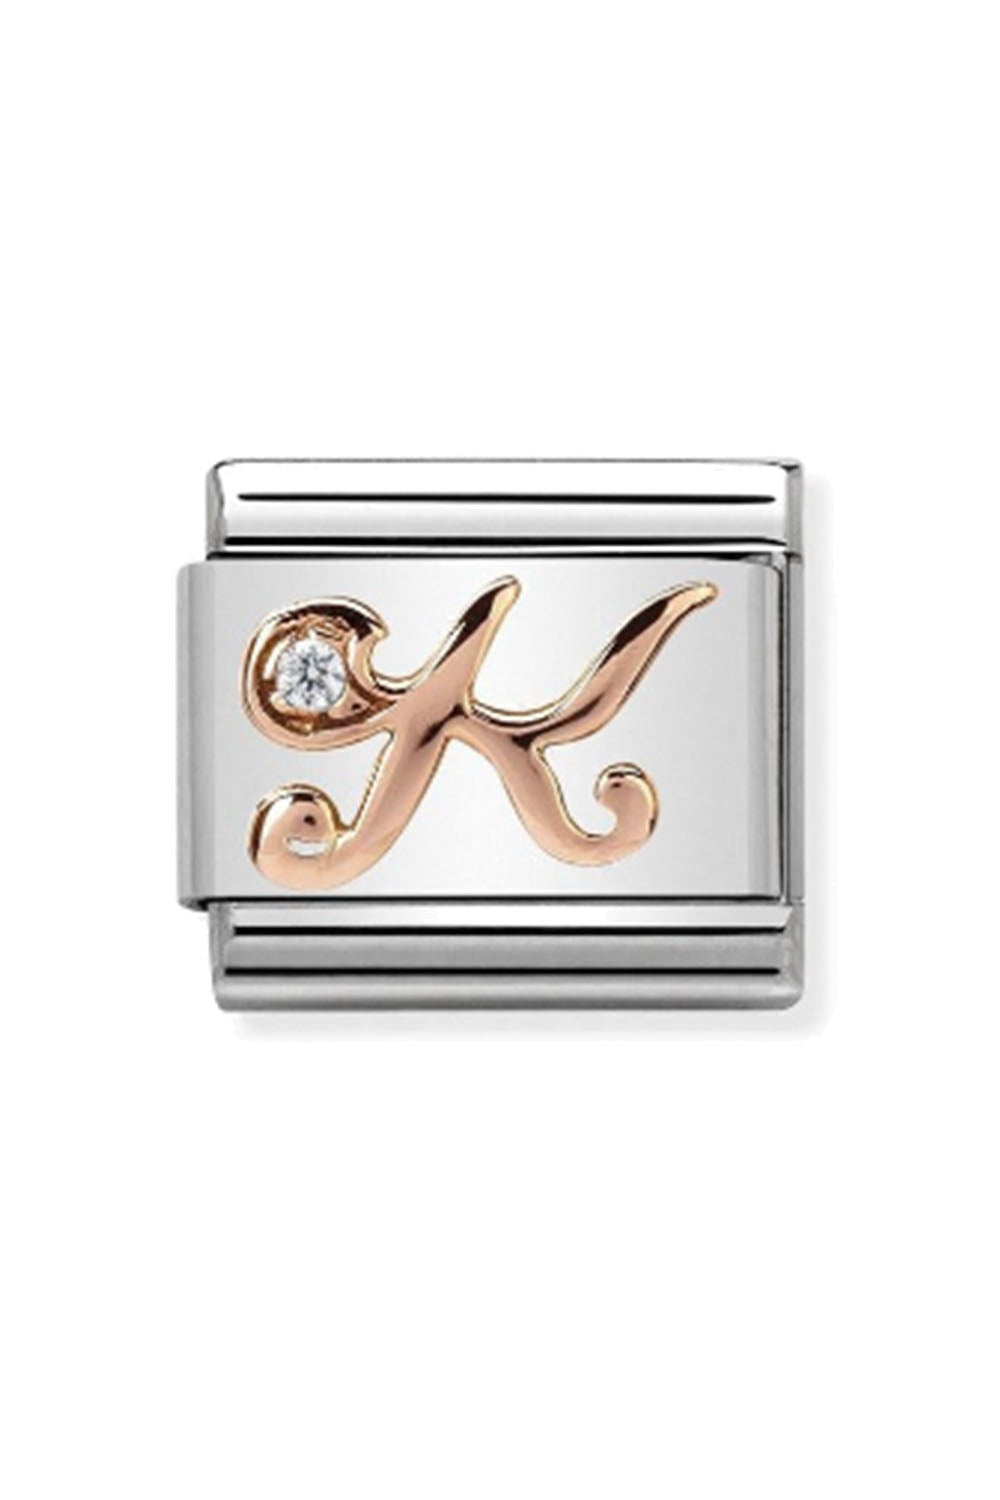 LETTERS 9k rose gold and CZ K